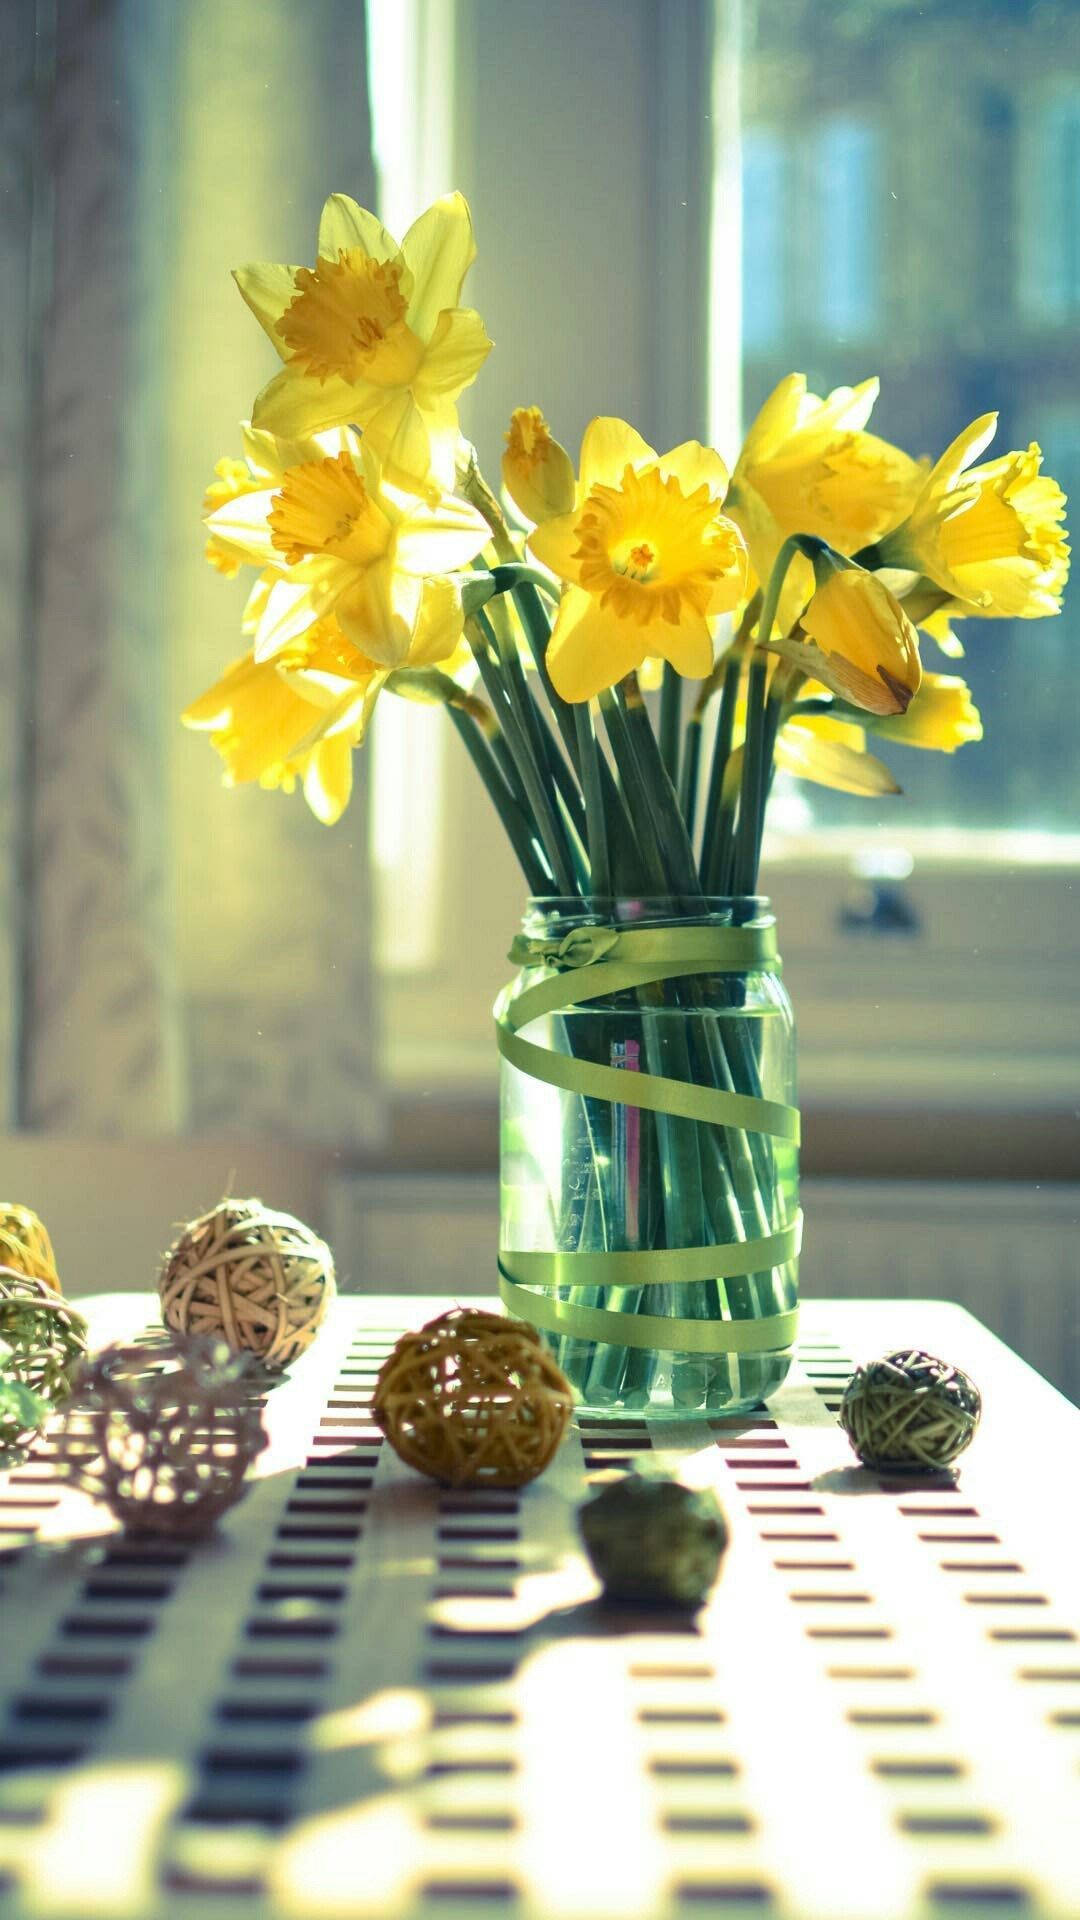 "Elegant Yellow Daffodils in a Clear Glass Vase" Wallpaper